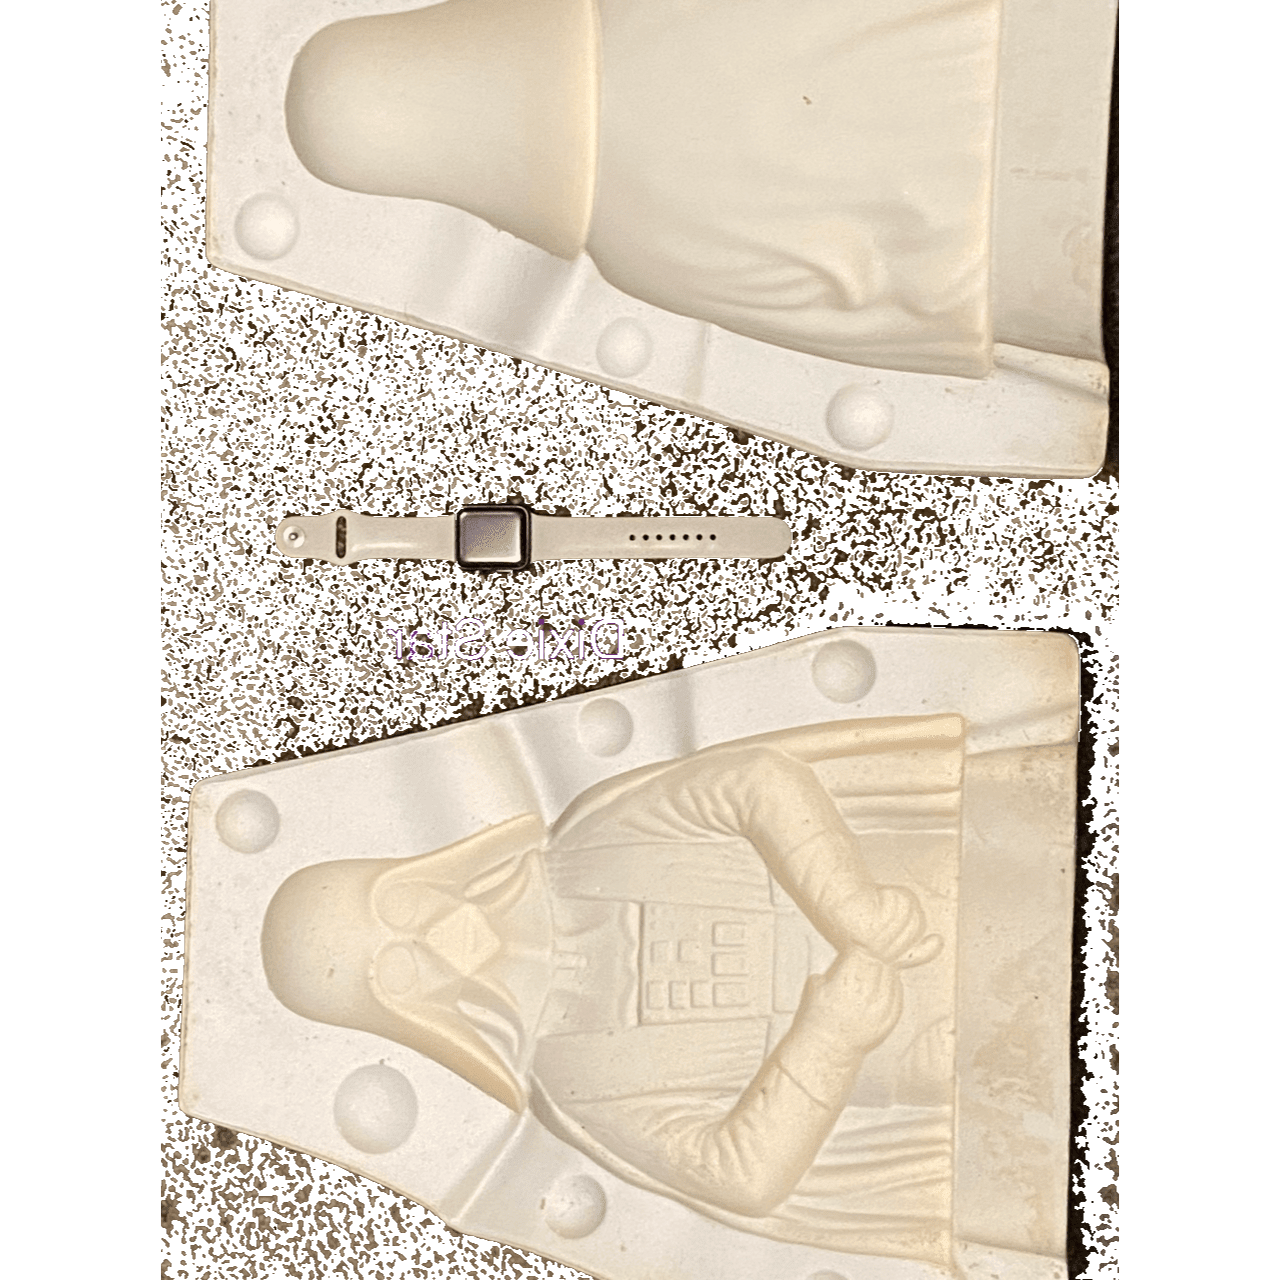 Slip Cast Molds - Molds, Greenware, Bisque, and More - Lynn Michaels  Ceramics and Collectibles